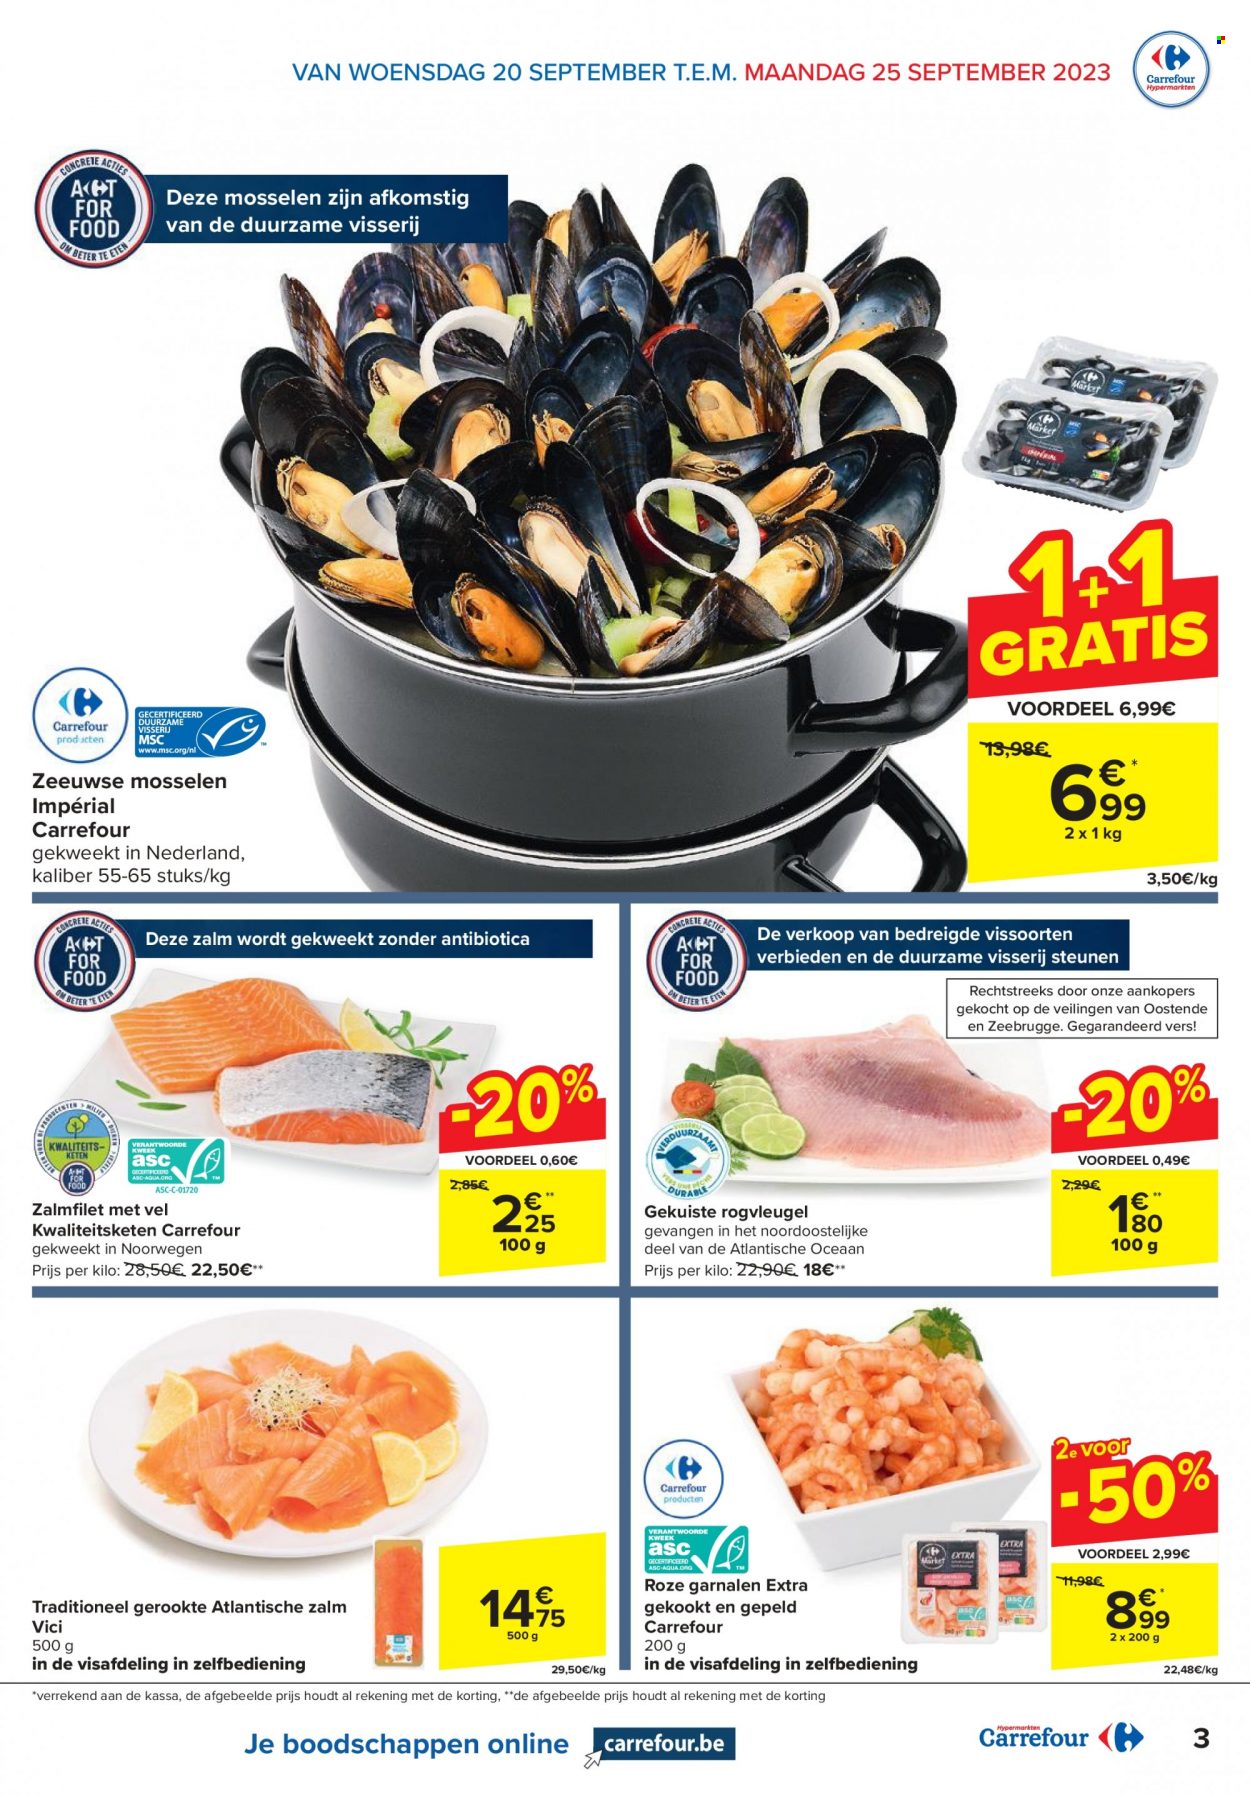 Catalogue Carrefour hypermarkt - 20.9.2023 - 2.10.2023. Page 3.